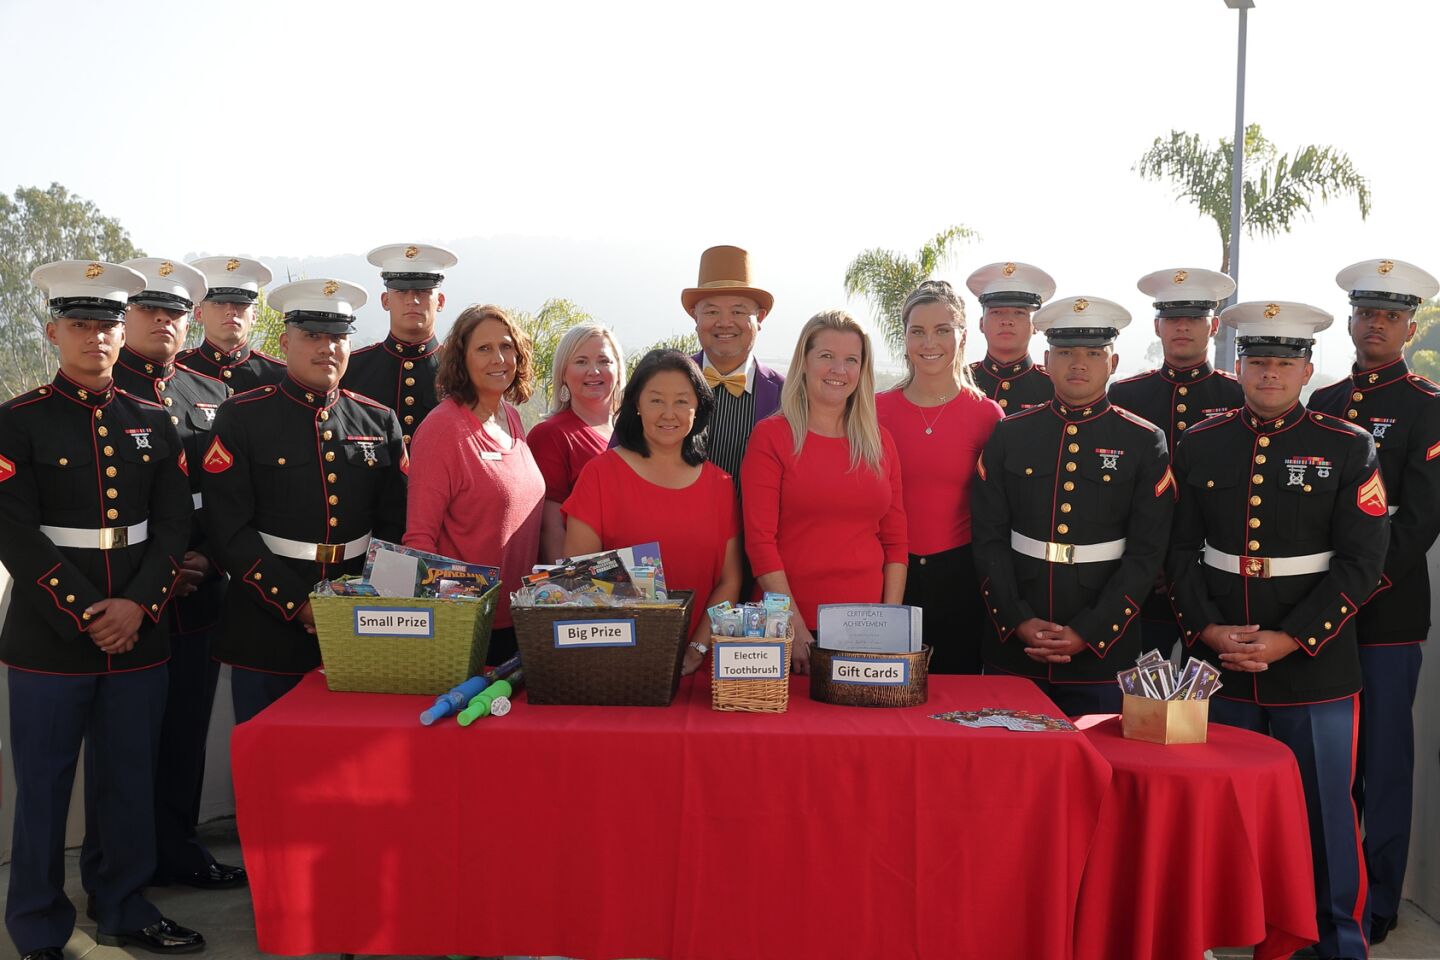 In the center are Dr. Curtis Chan and his wife Mae surrounded by his staff and Marines from Camp Pendleton.